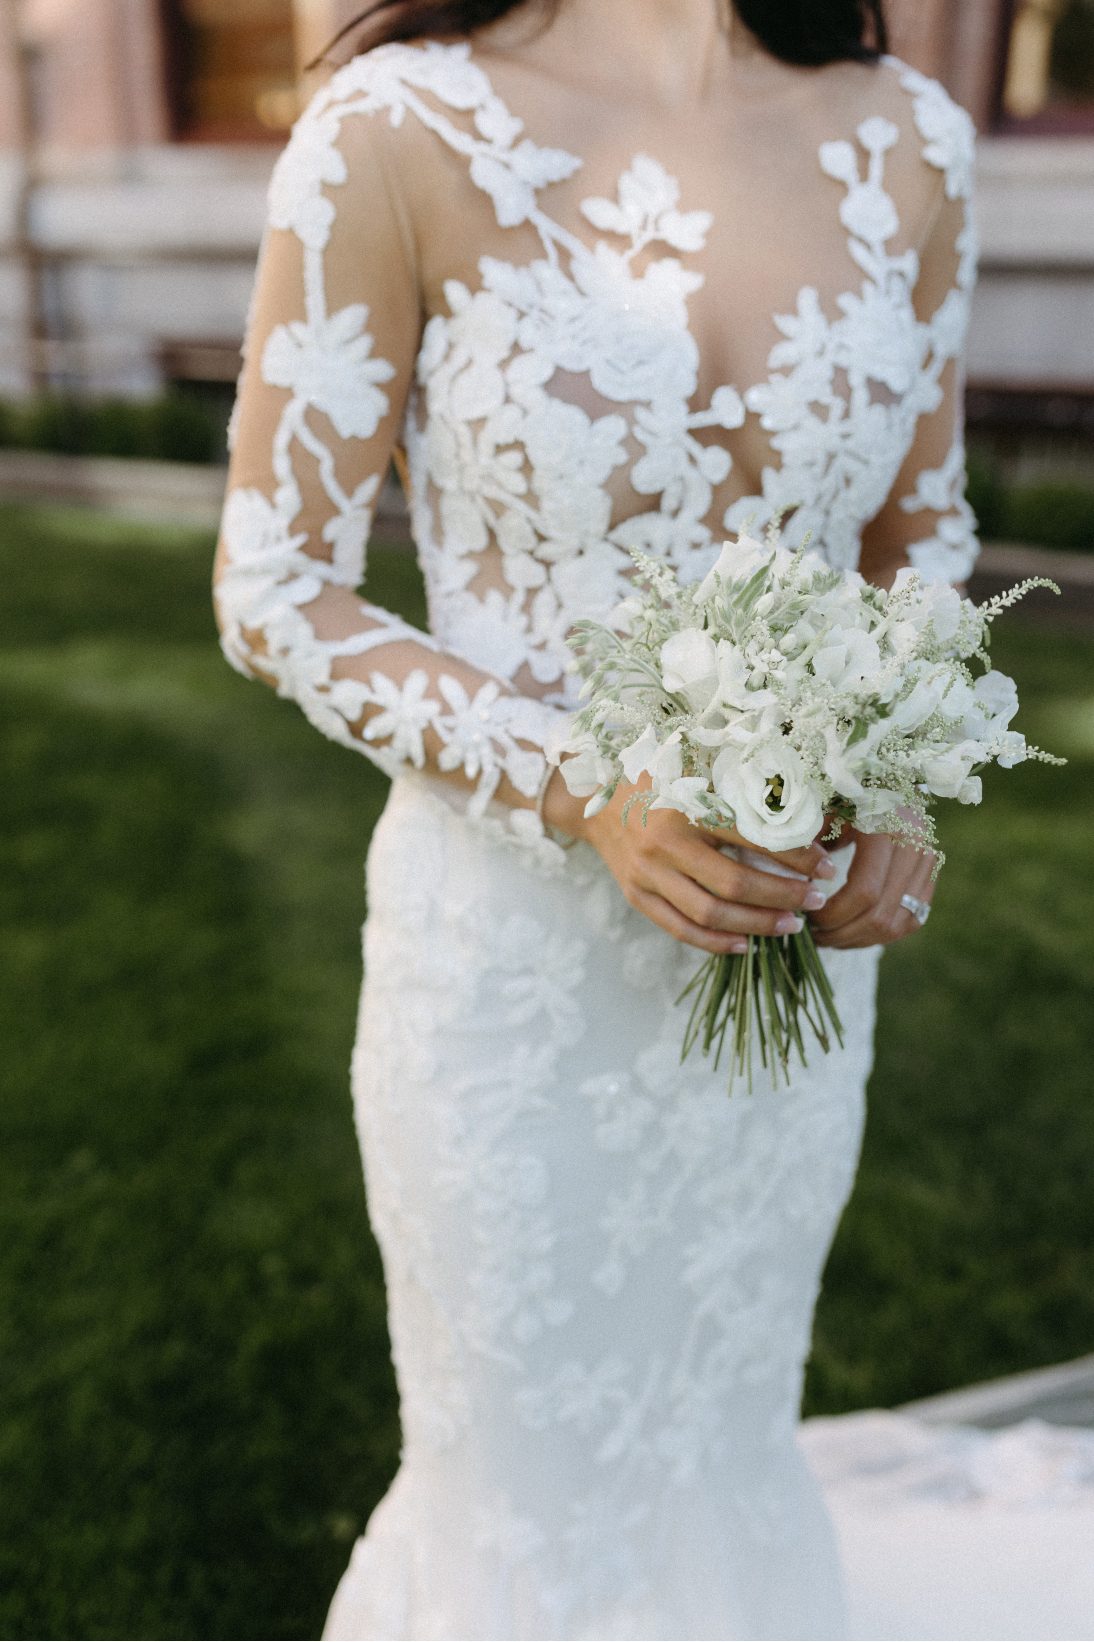 A close up of Stephanie's beautiful, ornate gown and her trendy white posy bouquet